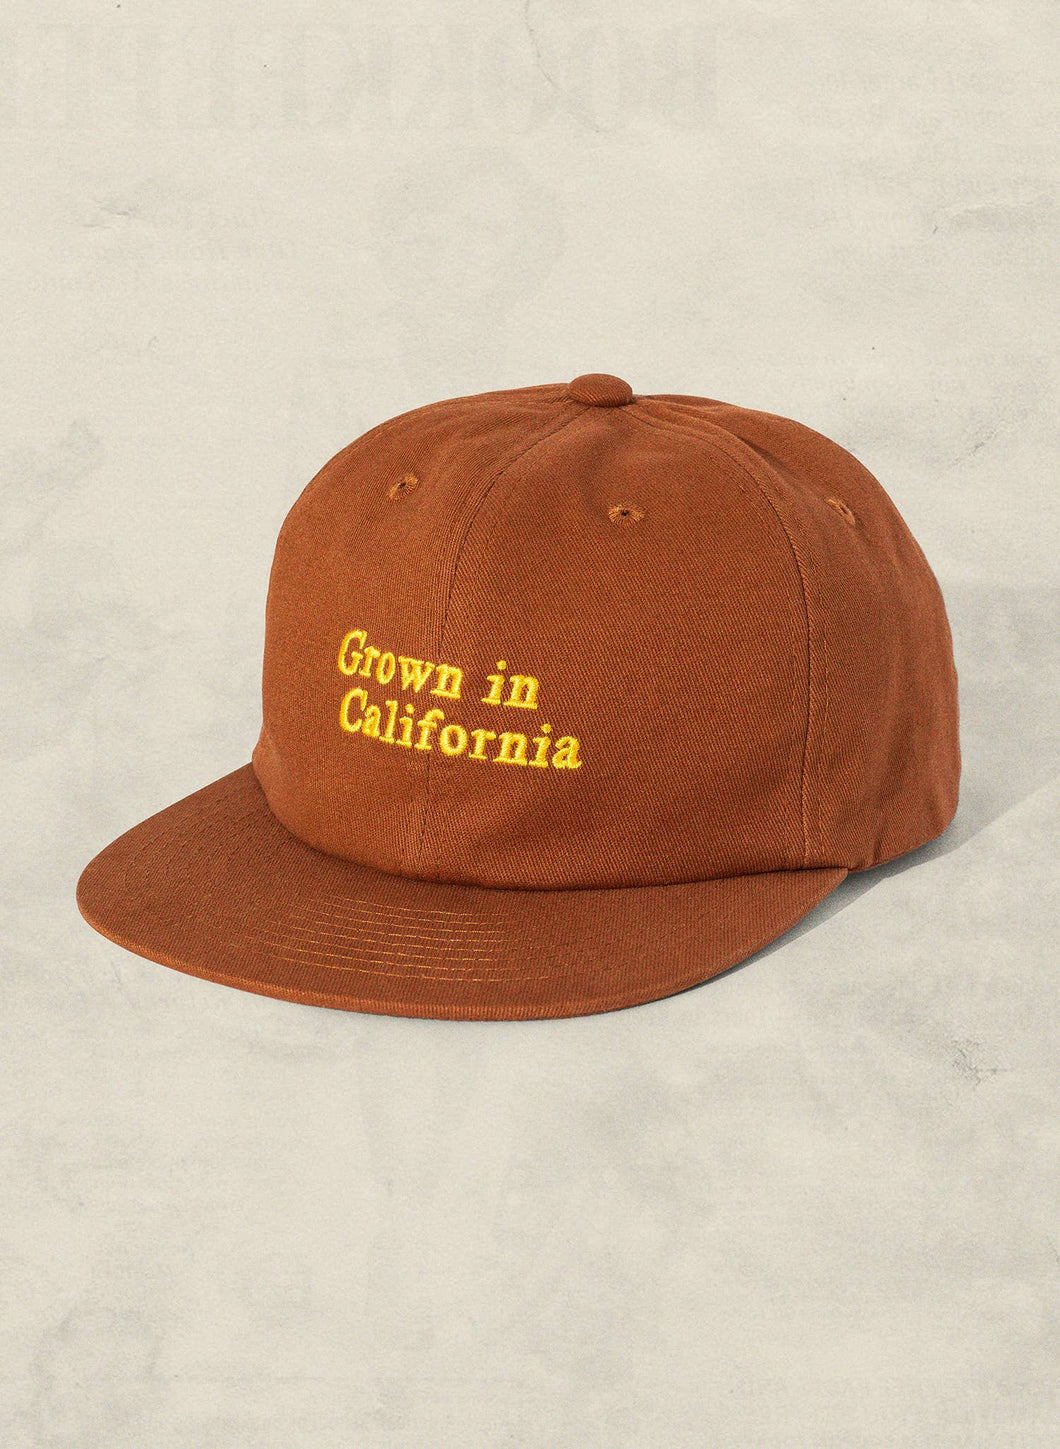 Grown in California Relaxed Strapback Hat